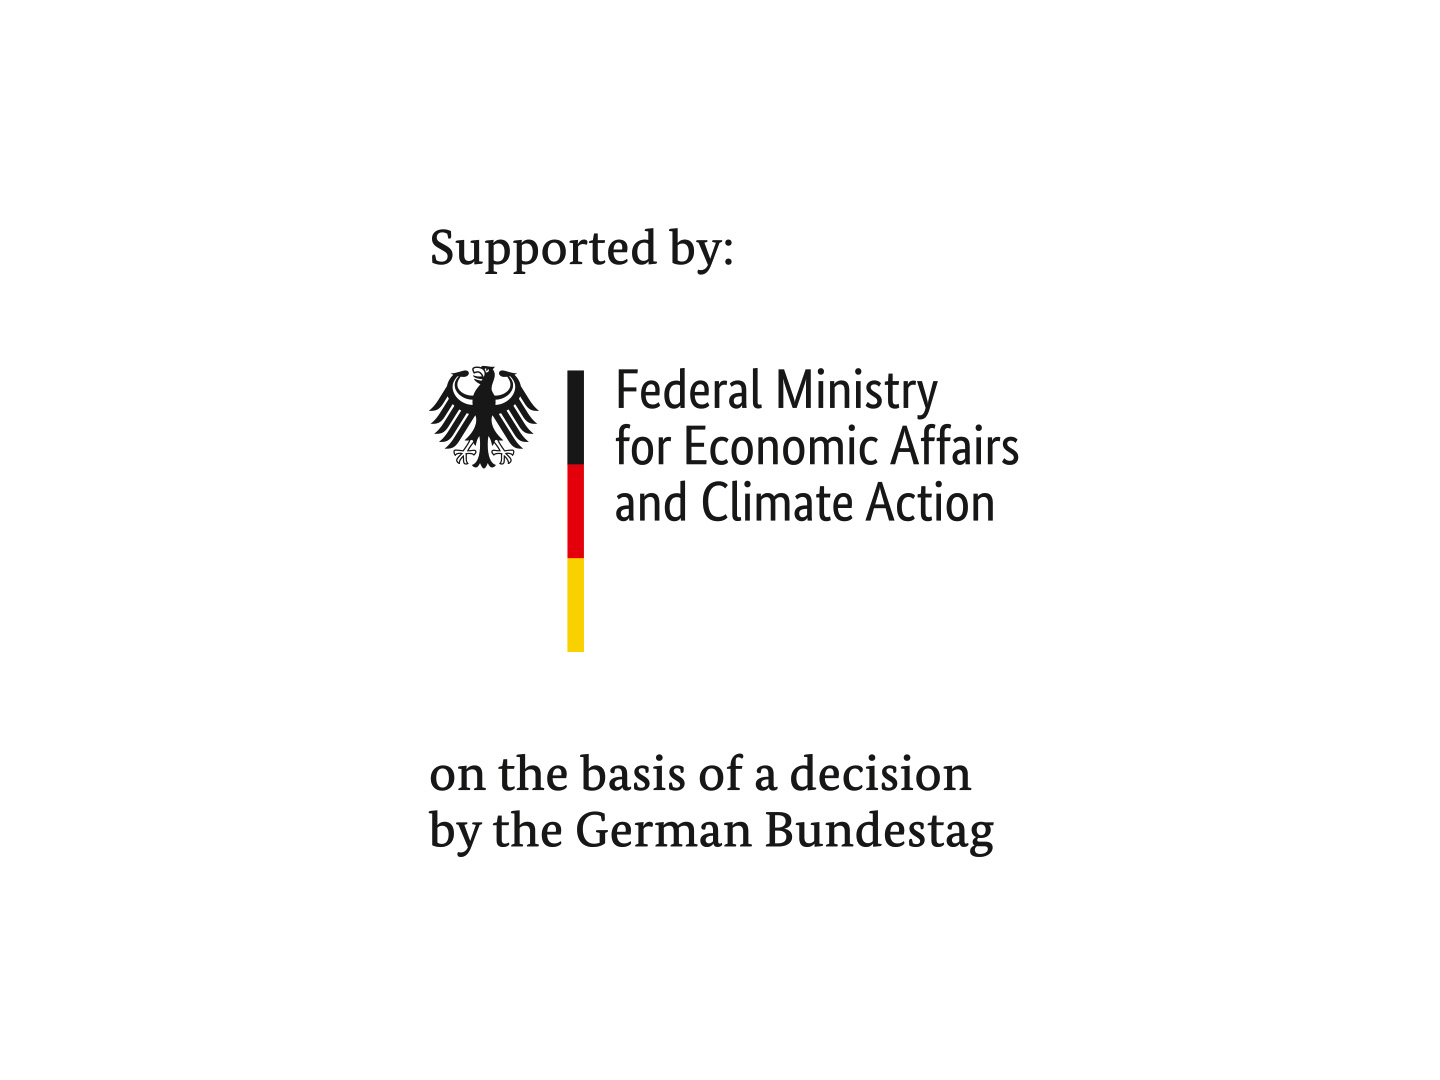 Federal Ministry for economic affairs and climate action